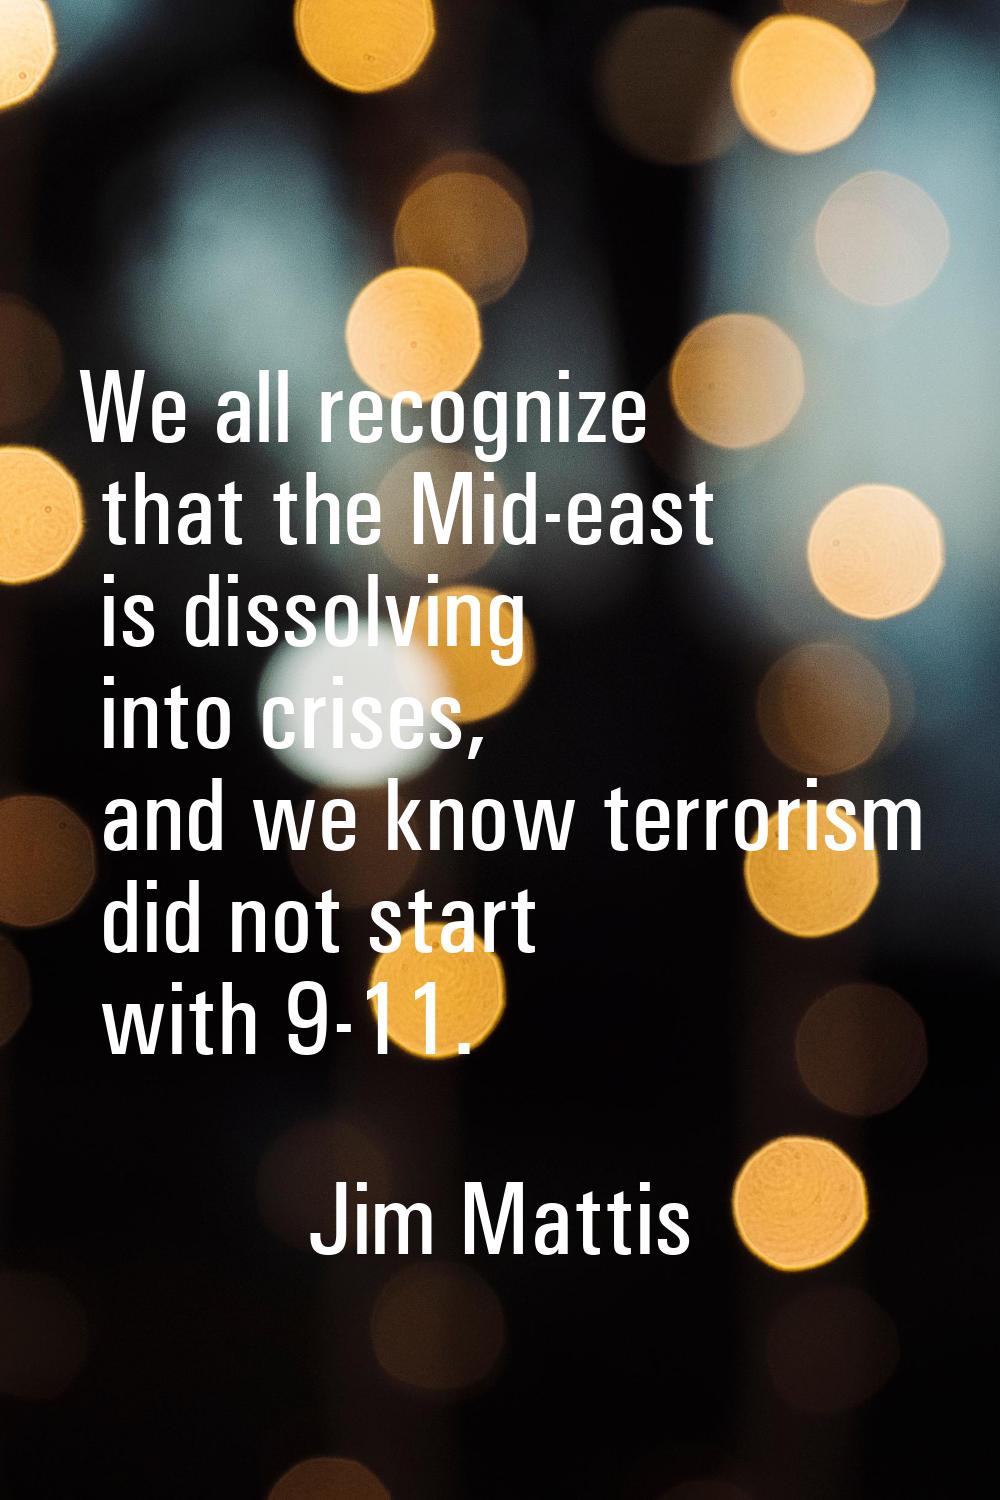 We all recognize that the Mid-east is dissolving into crises, and we know terrorism did not start w